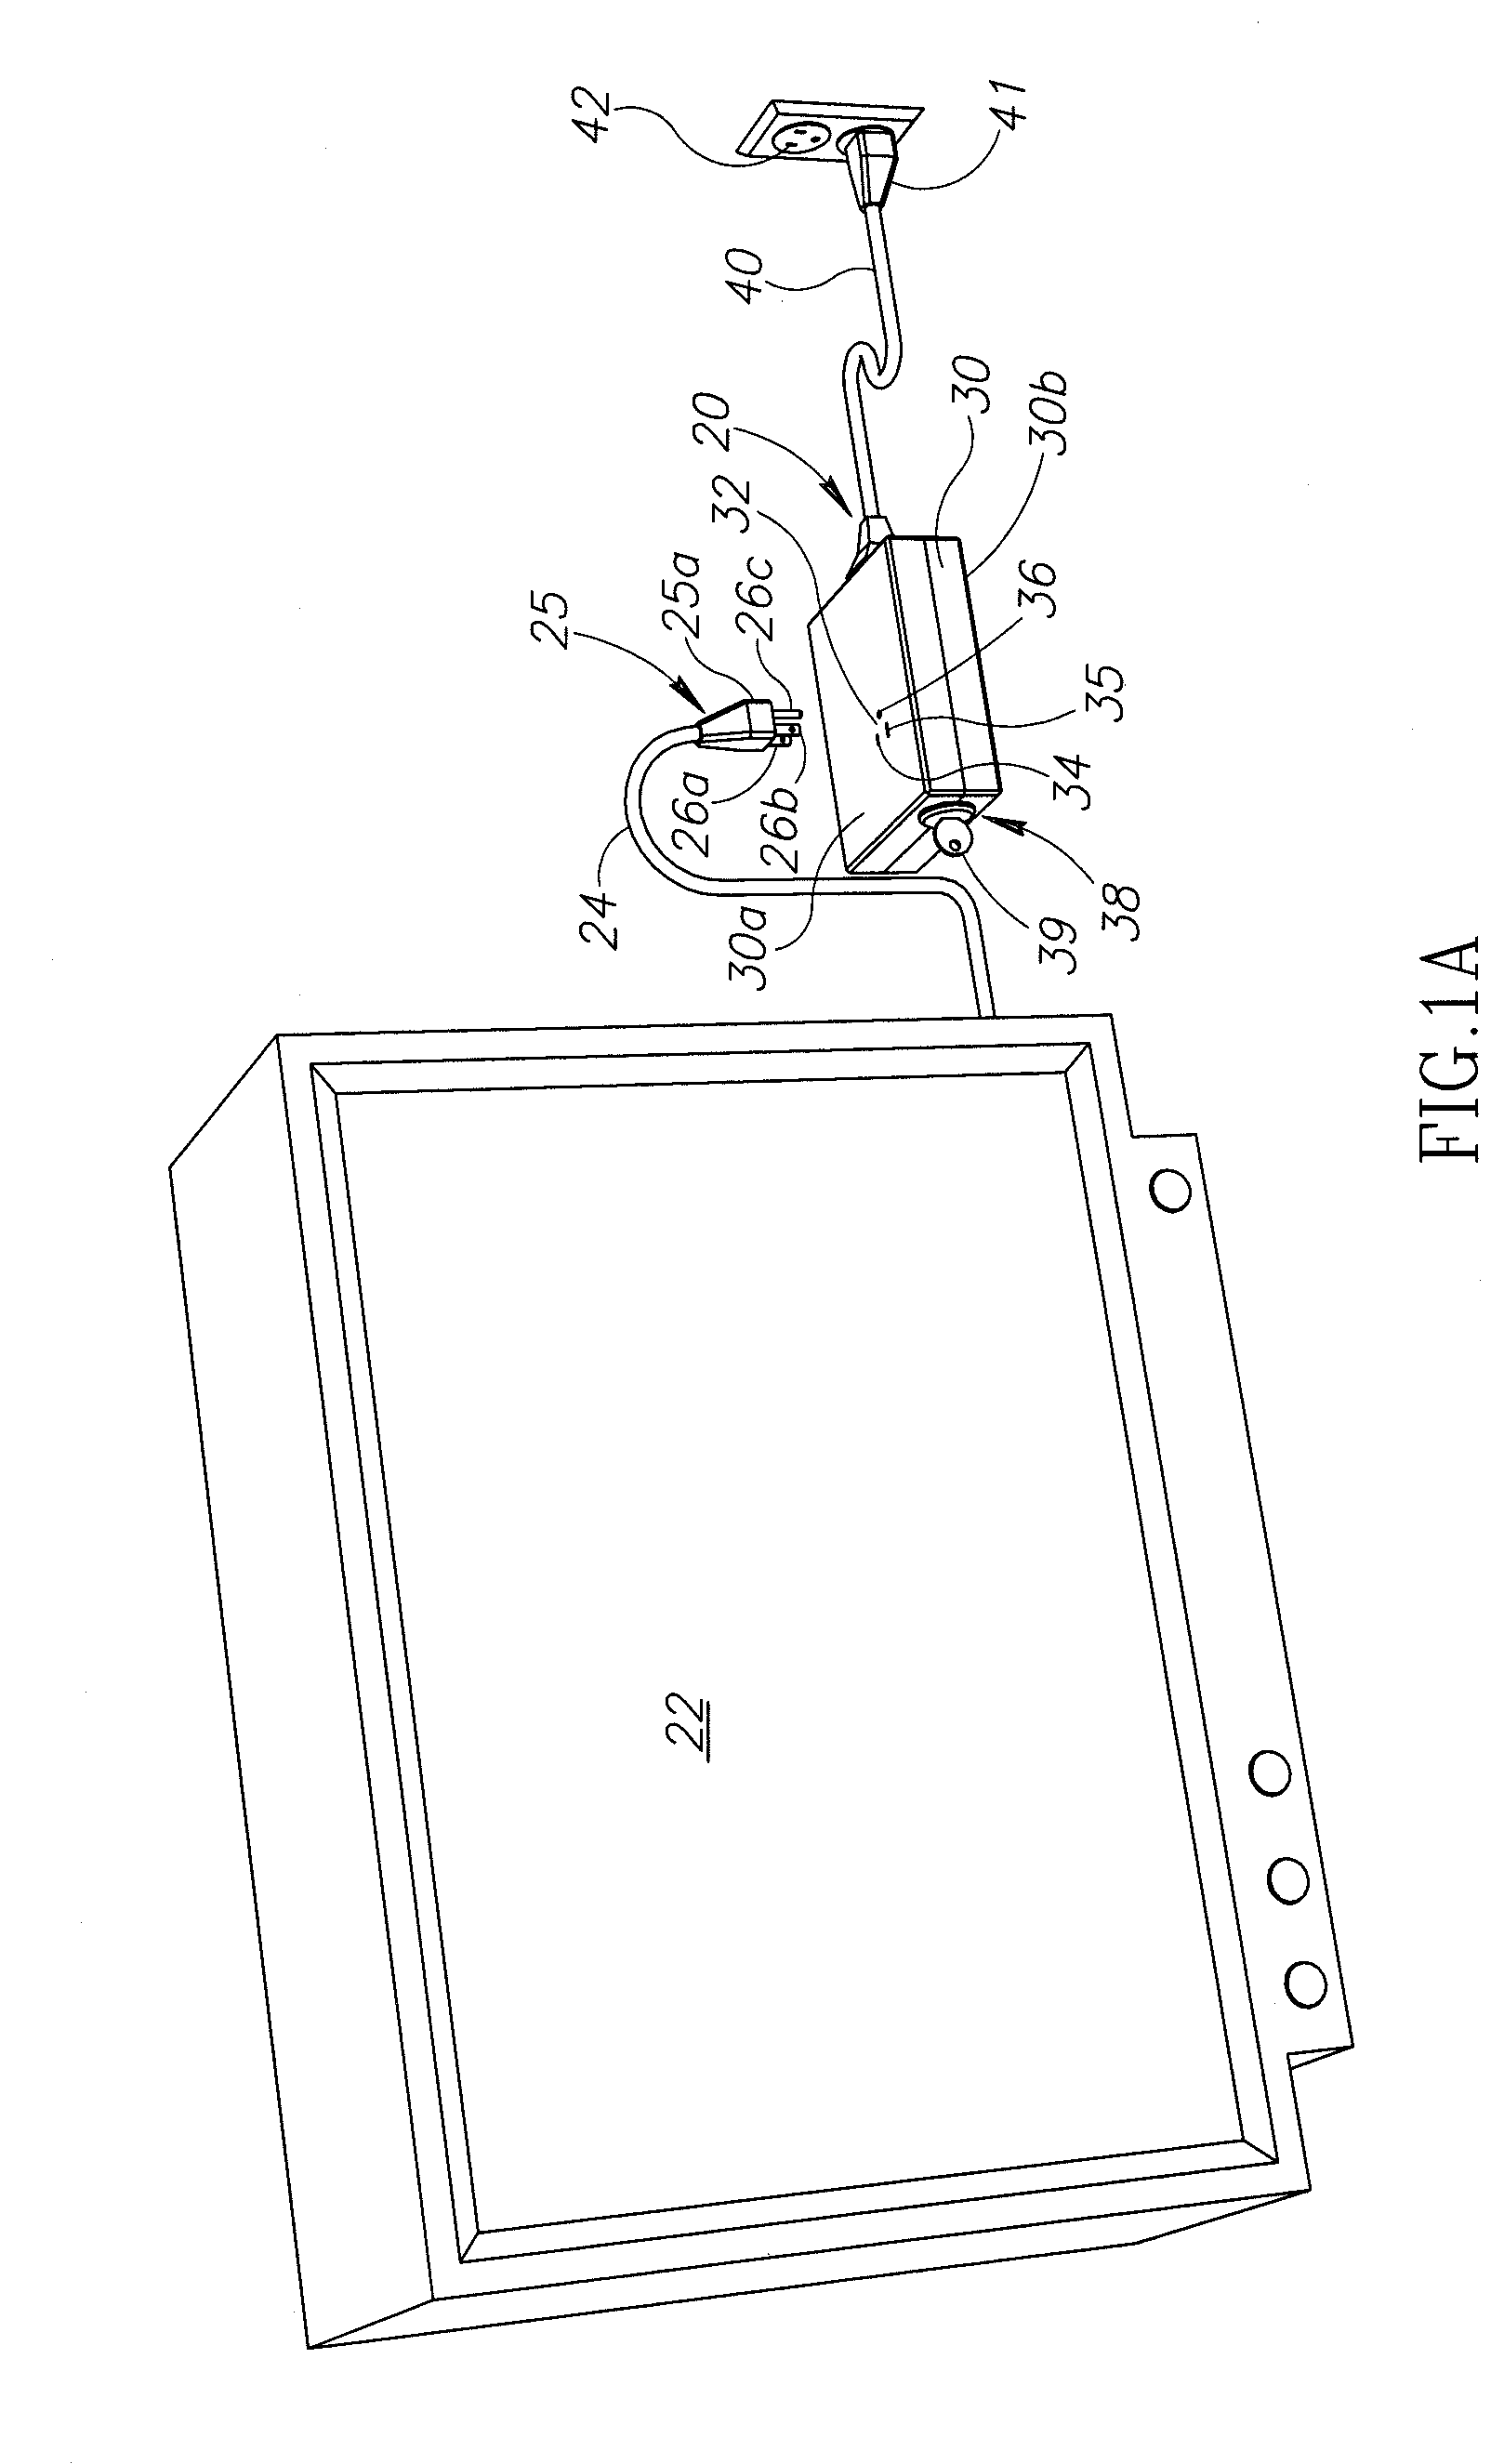 Power Control Device